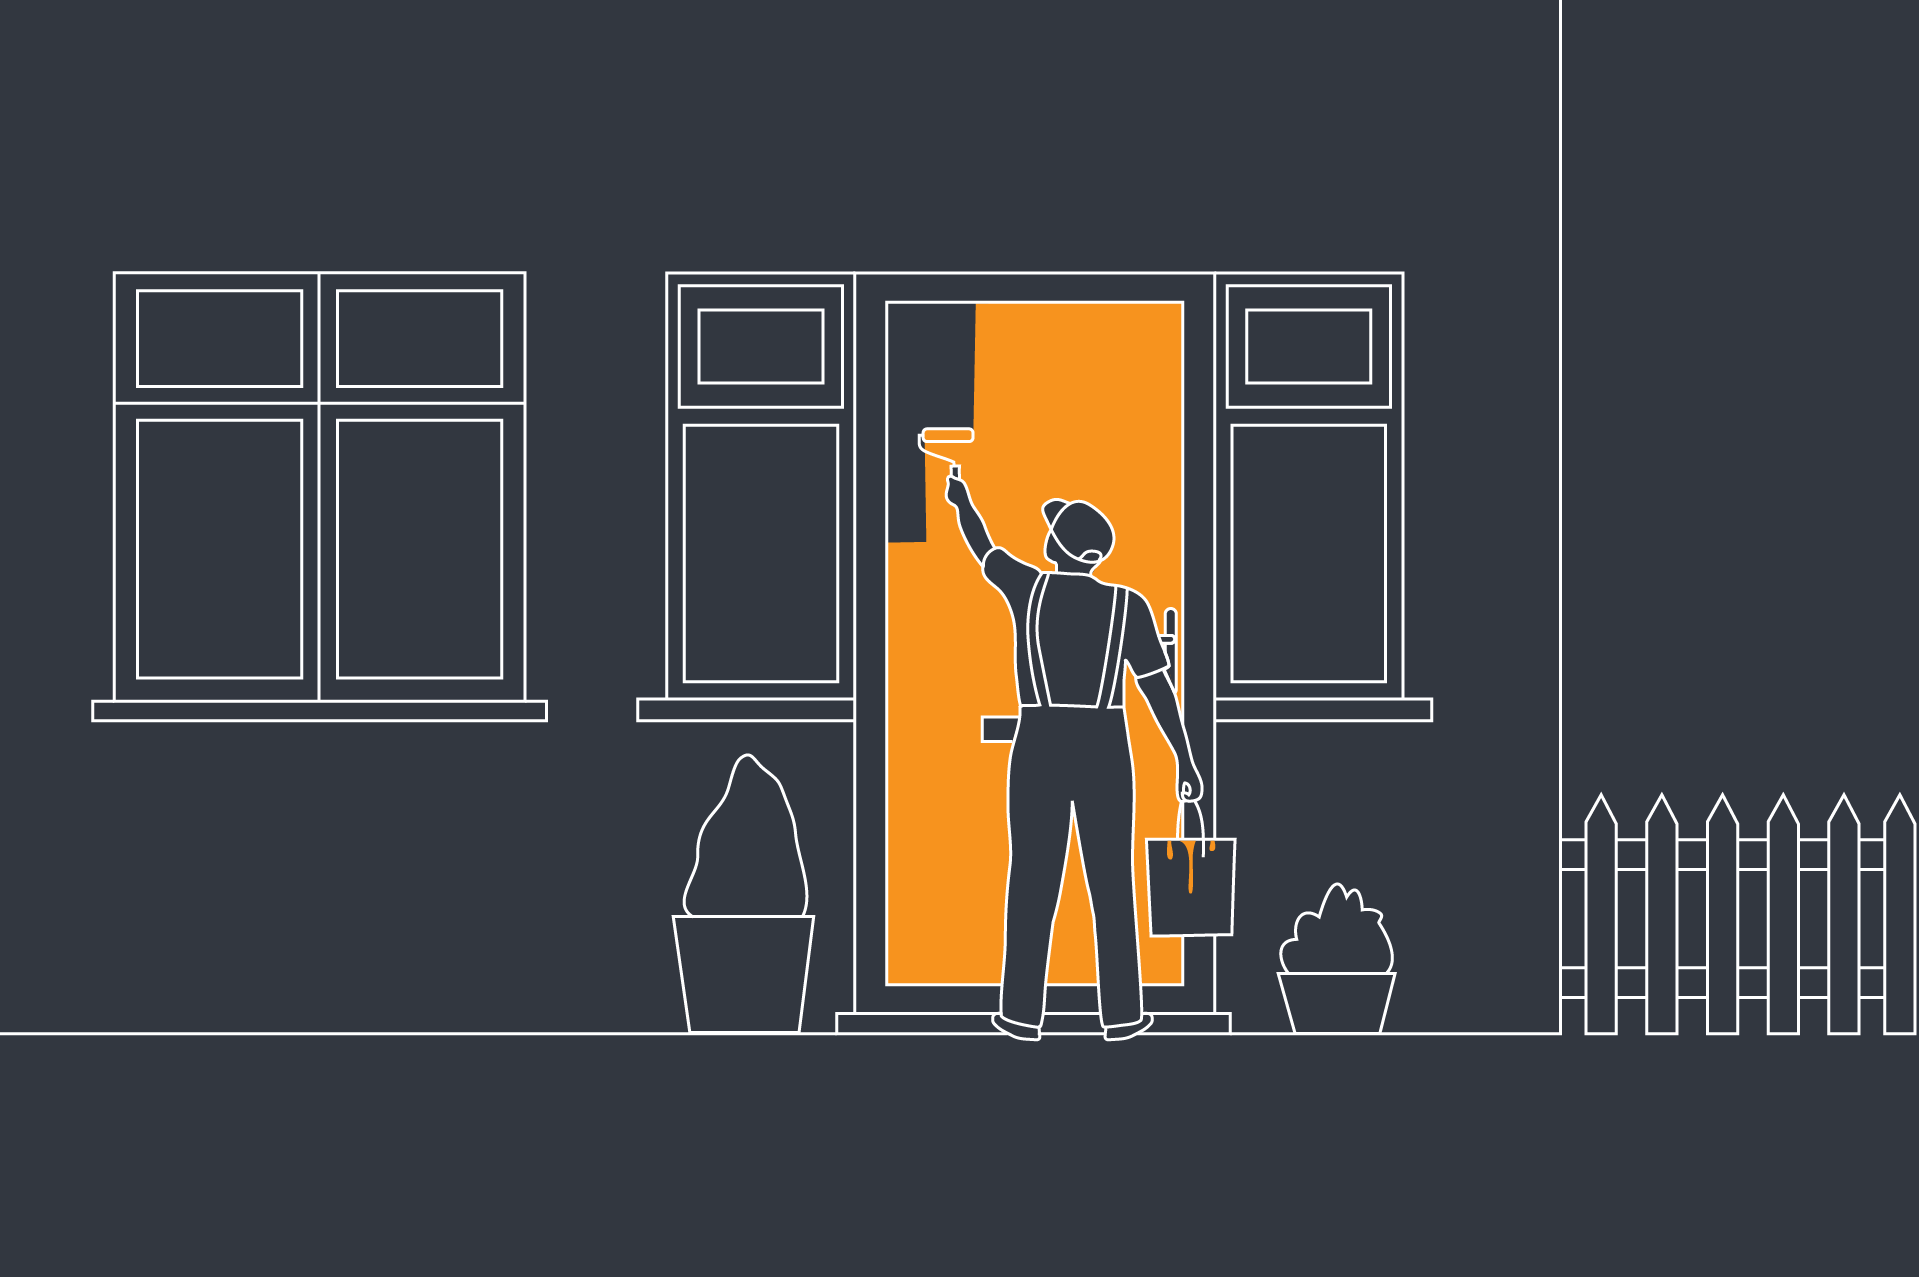 Illustration of a man painting a house to improve home's kerb appeal